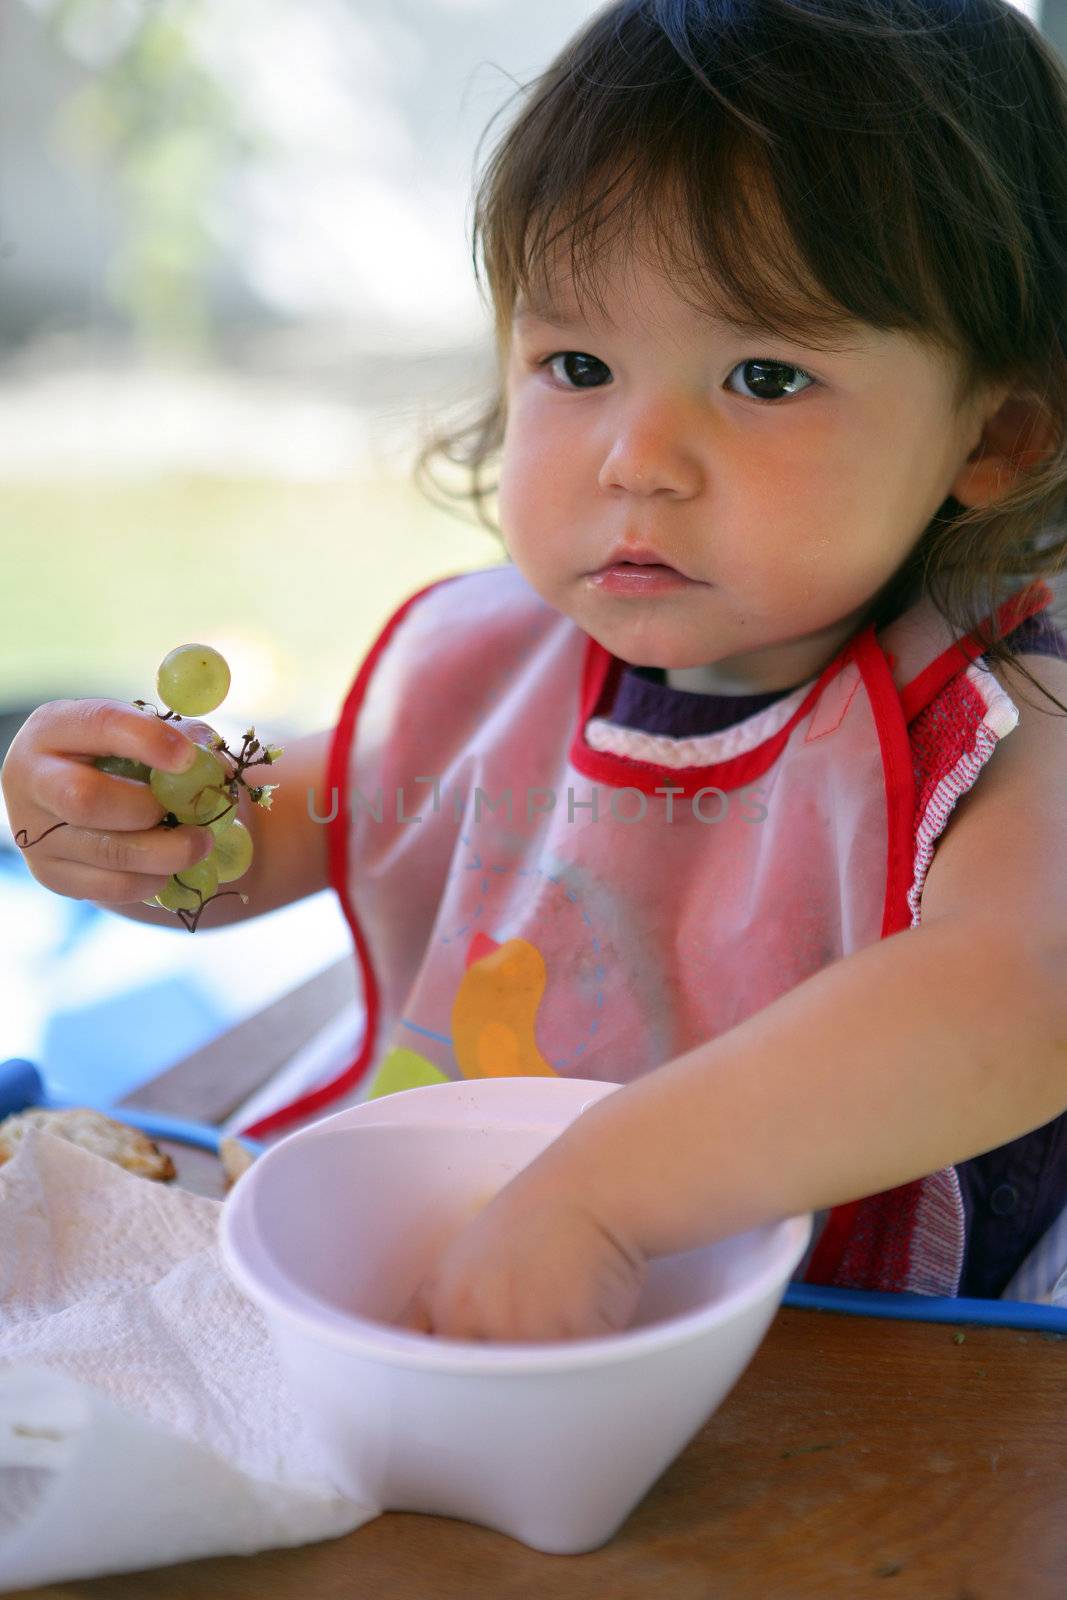 Little girl eating grapes from a bowl